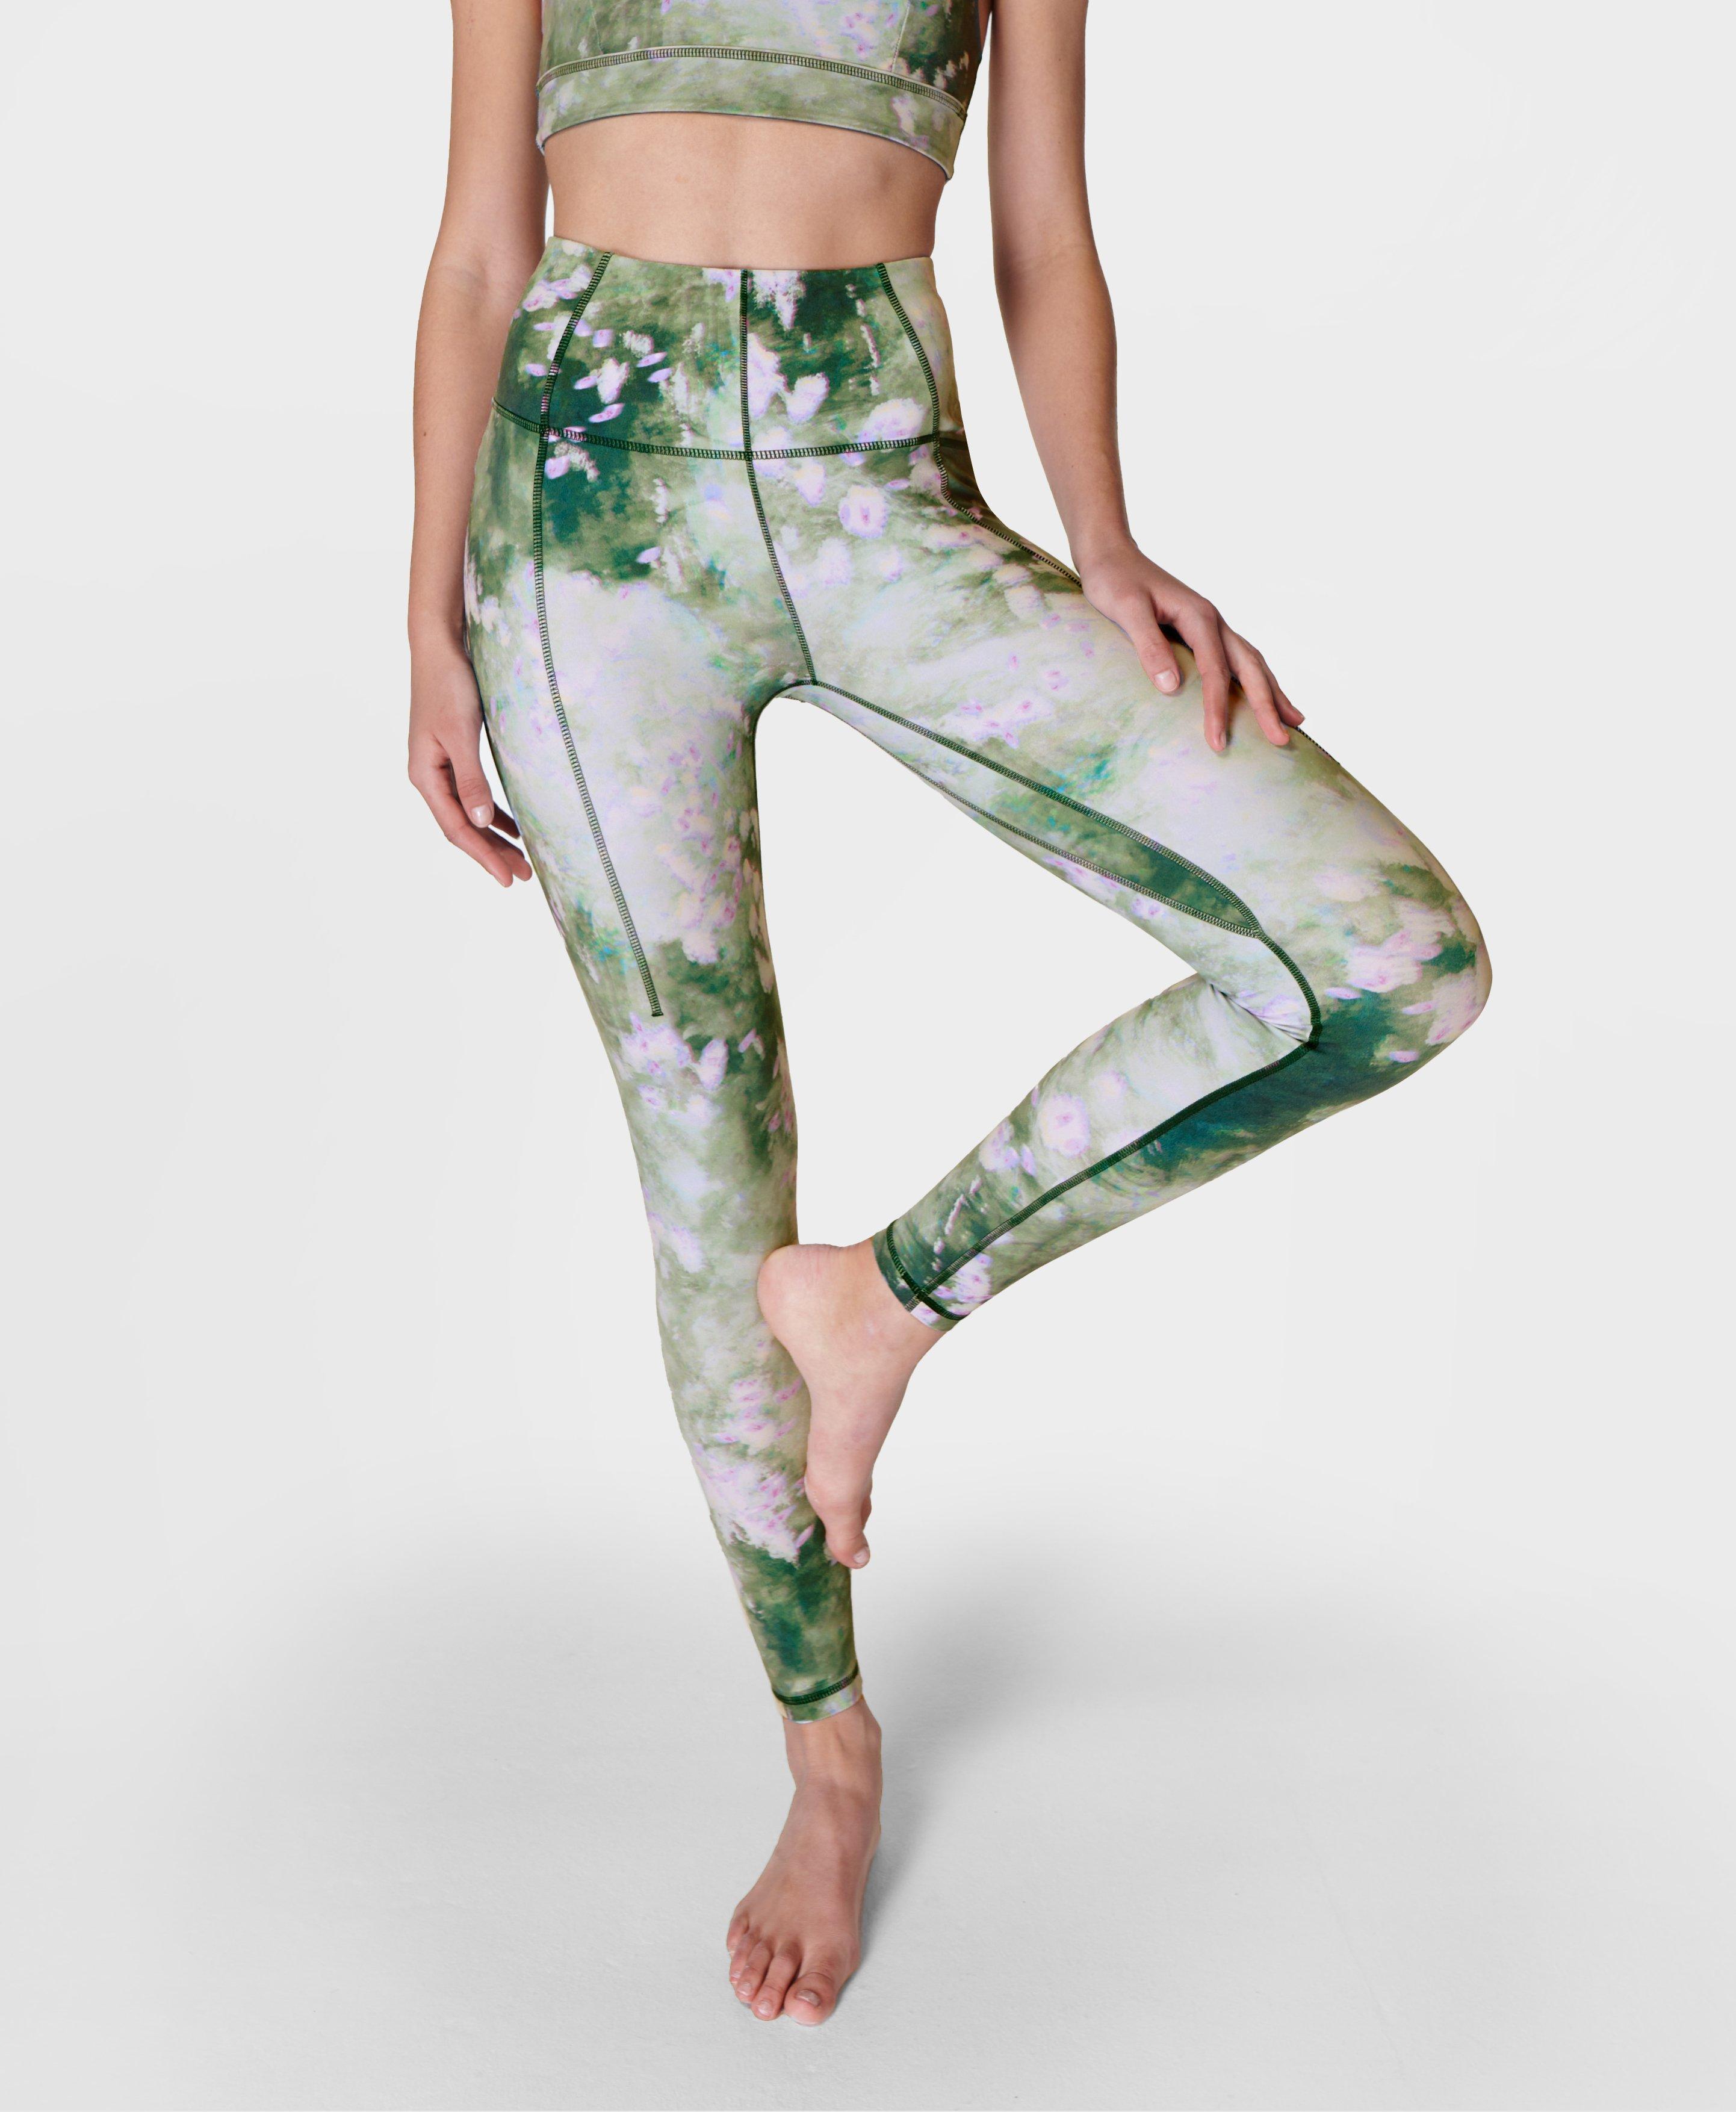 Sweaty Betty - Reversible leggings to make your fans green with envy, Shop  here